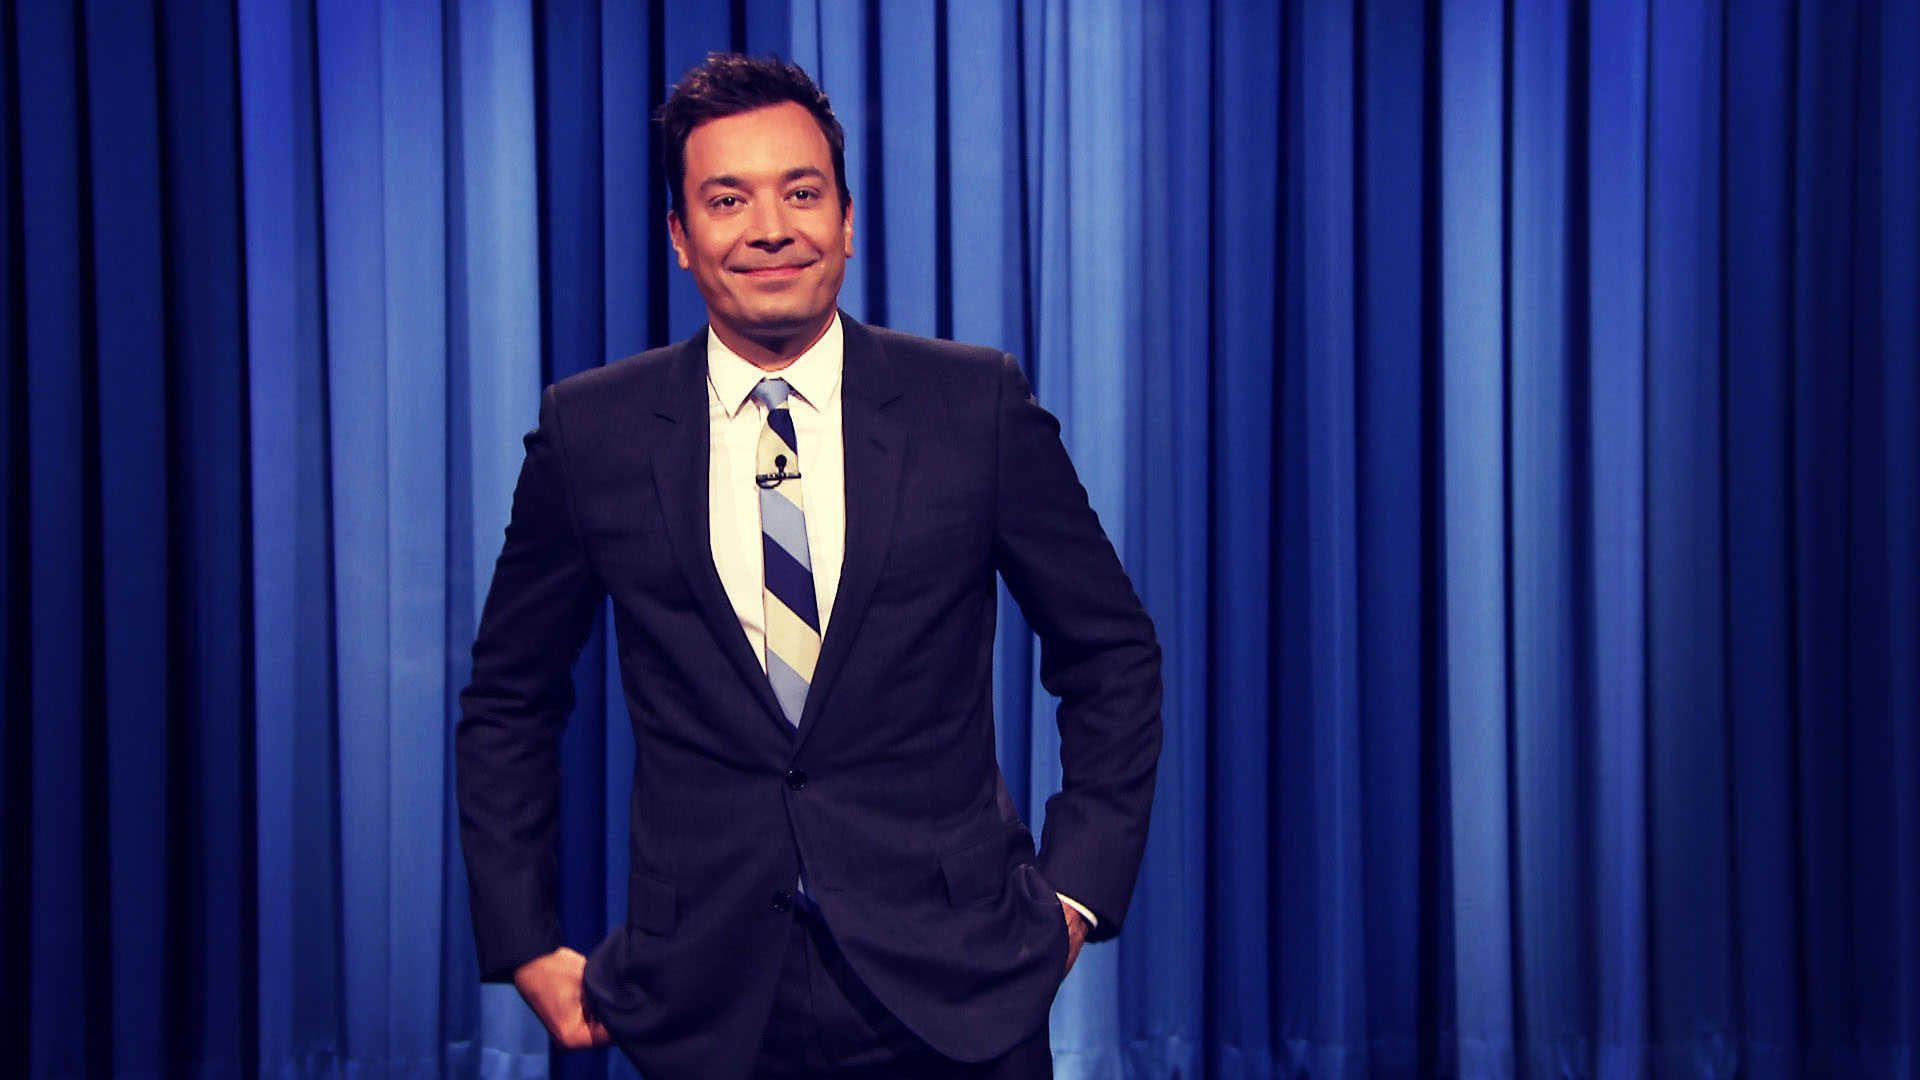 The Tonight Show Starring Jimmy Fallon Wallpapers